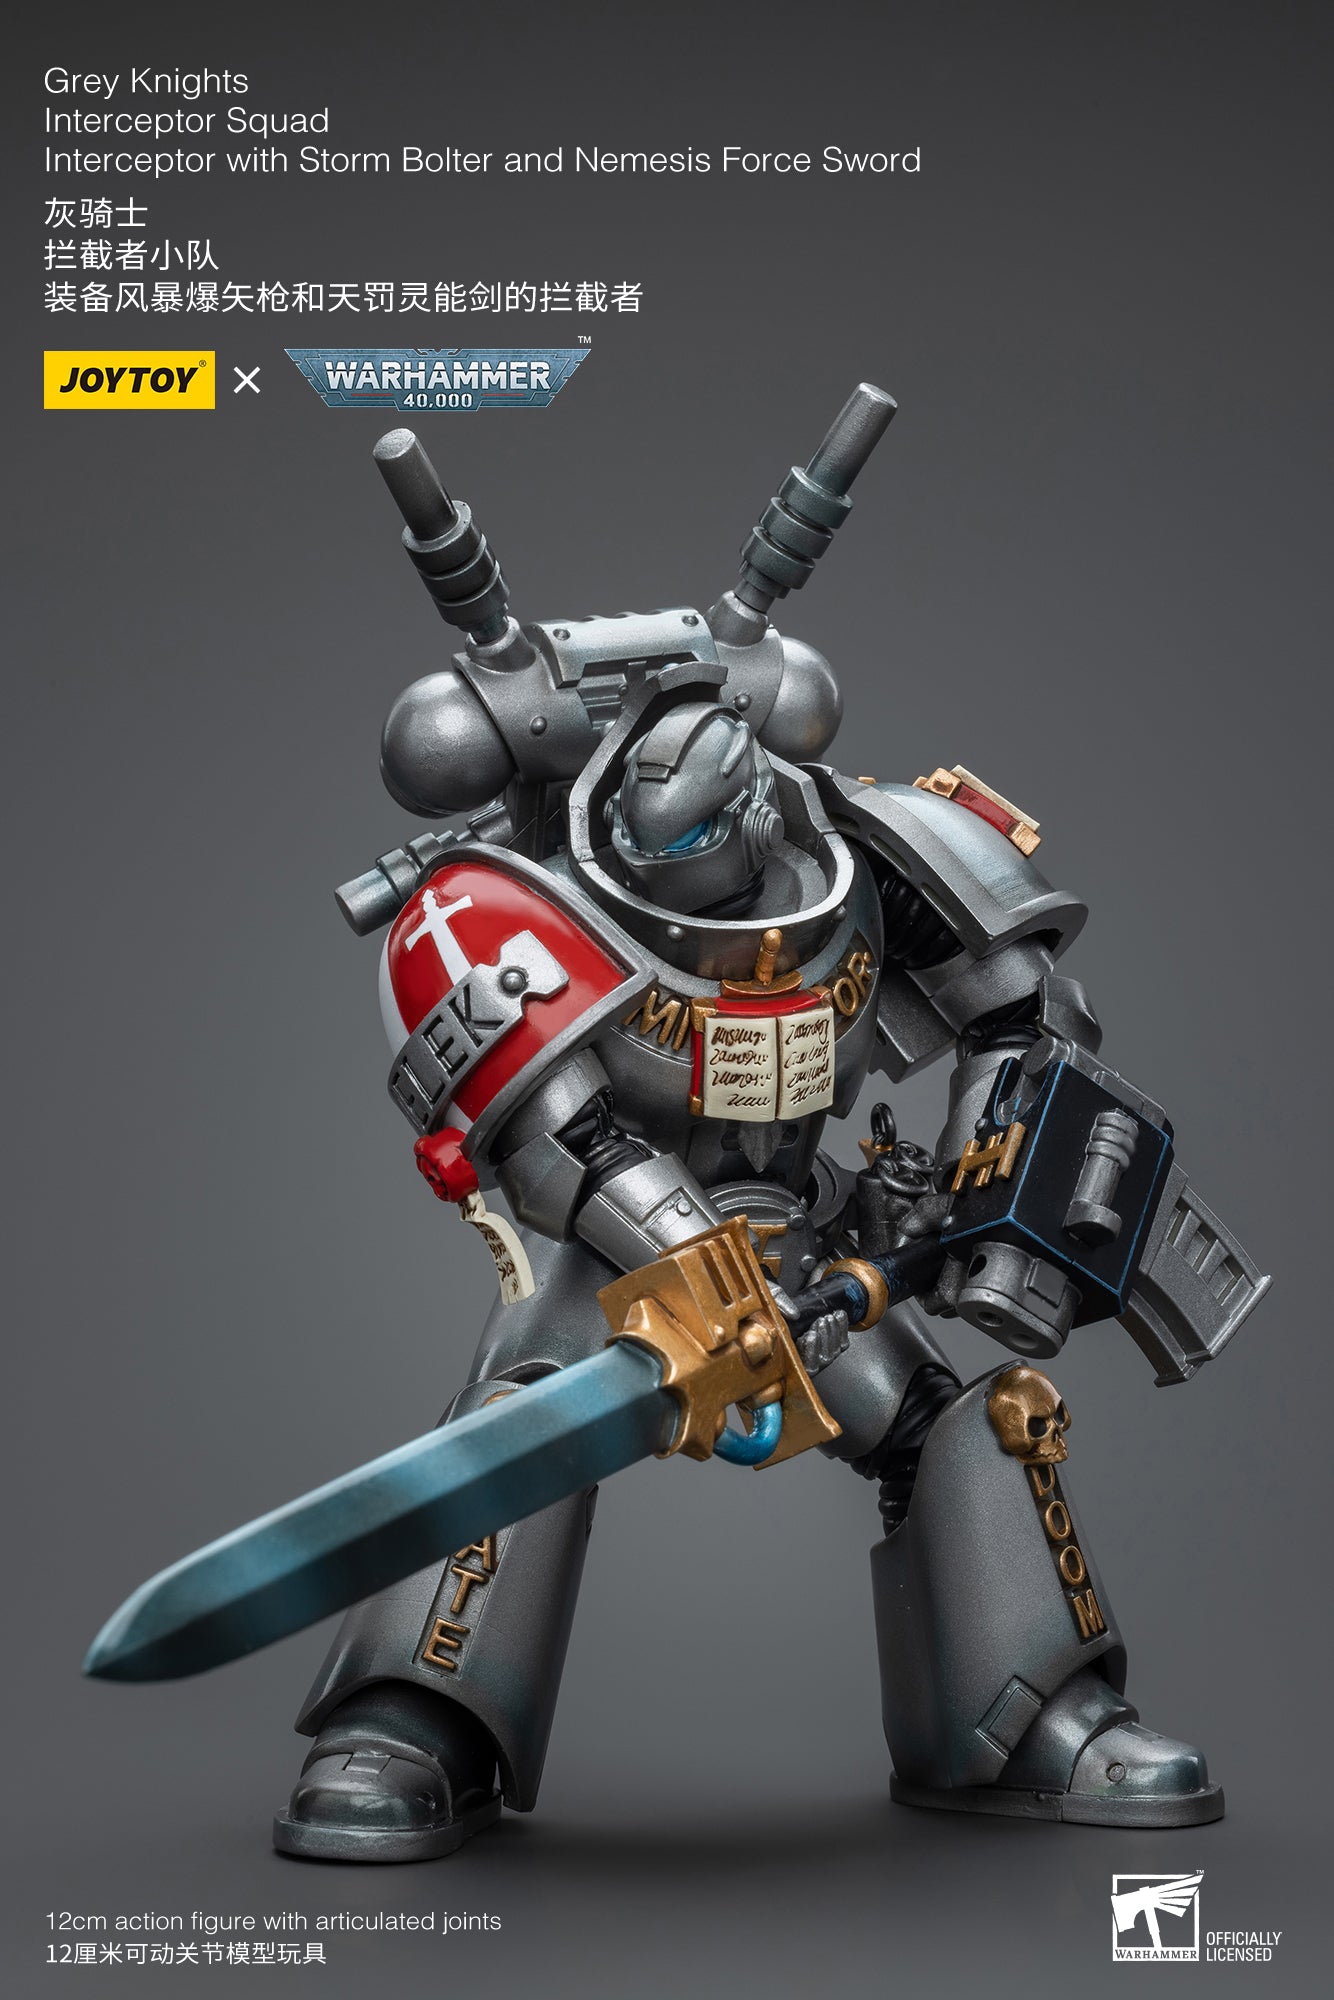 Warhammer 40k: Grey Knights: Interceptor with Storm Bolter and Nemesis Force Sword: Joy Toy